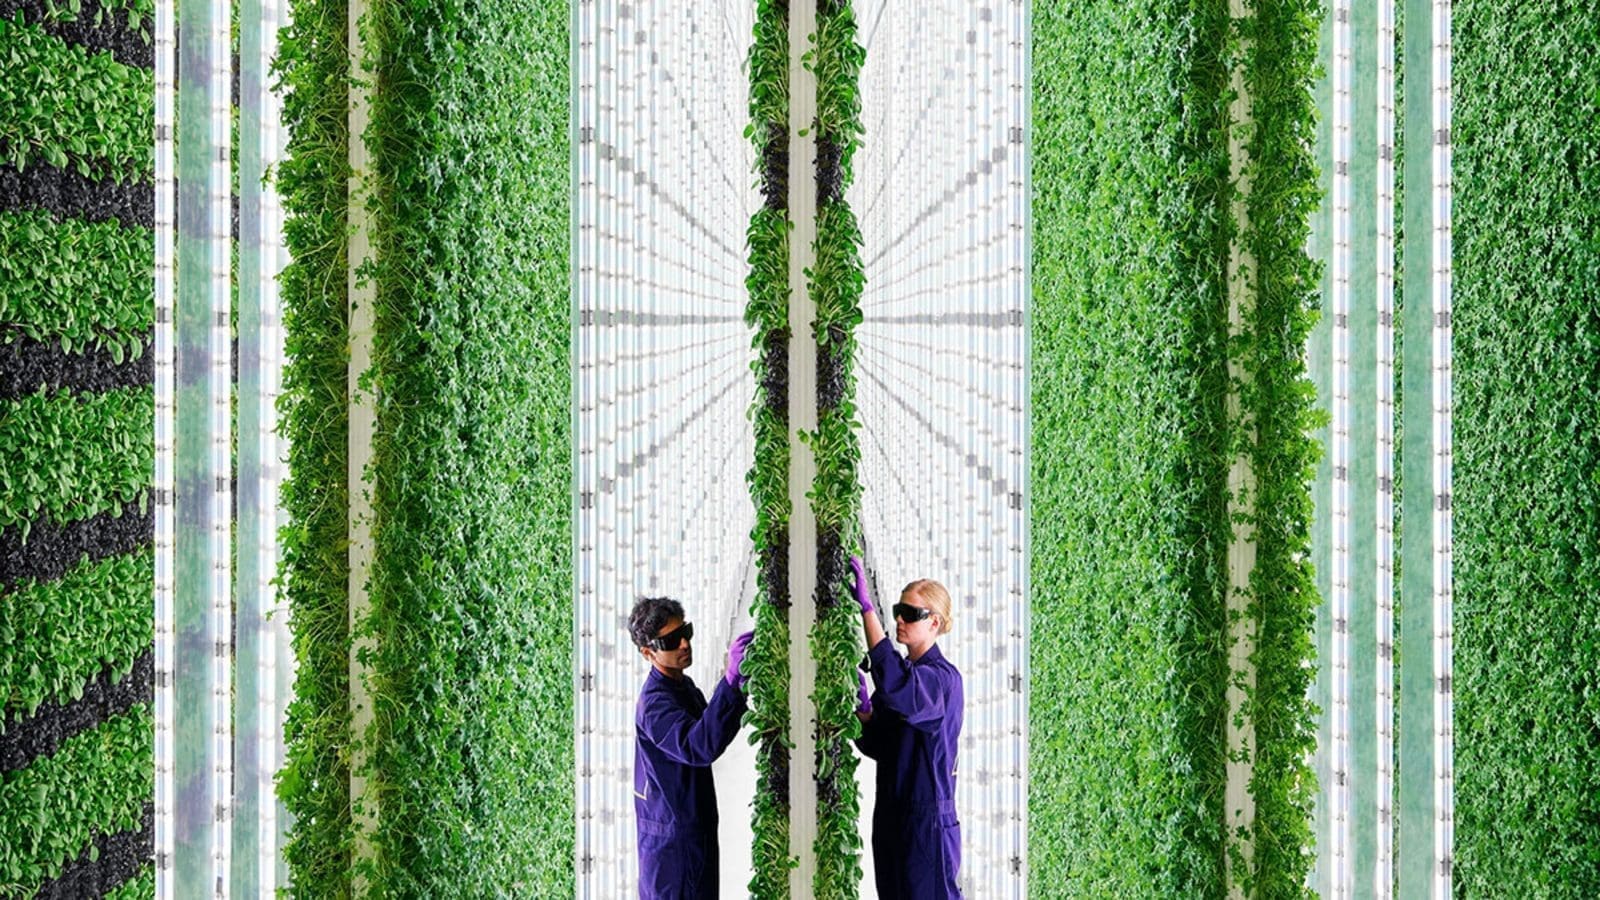 Plenty Unlimited expands capabilities with world’s largest and most advanced vertical farming projects